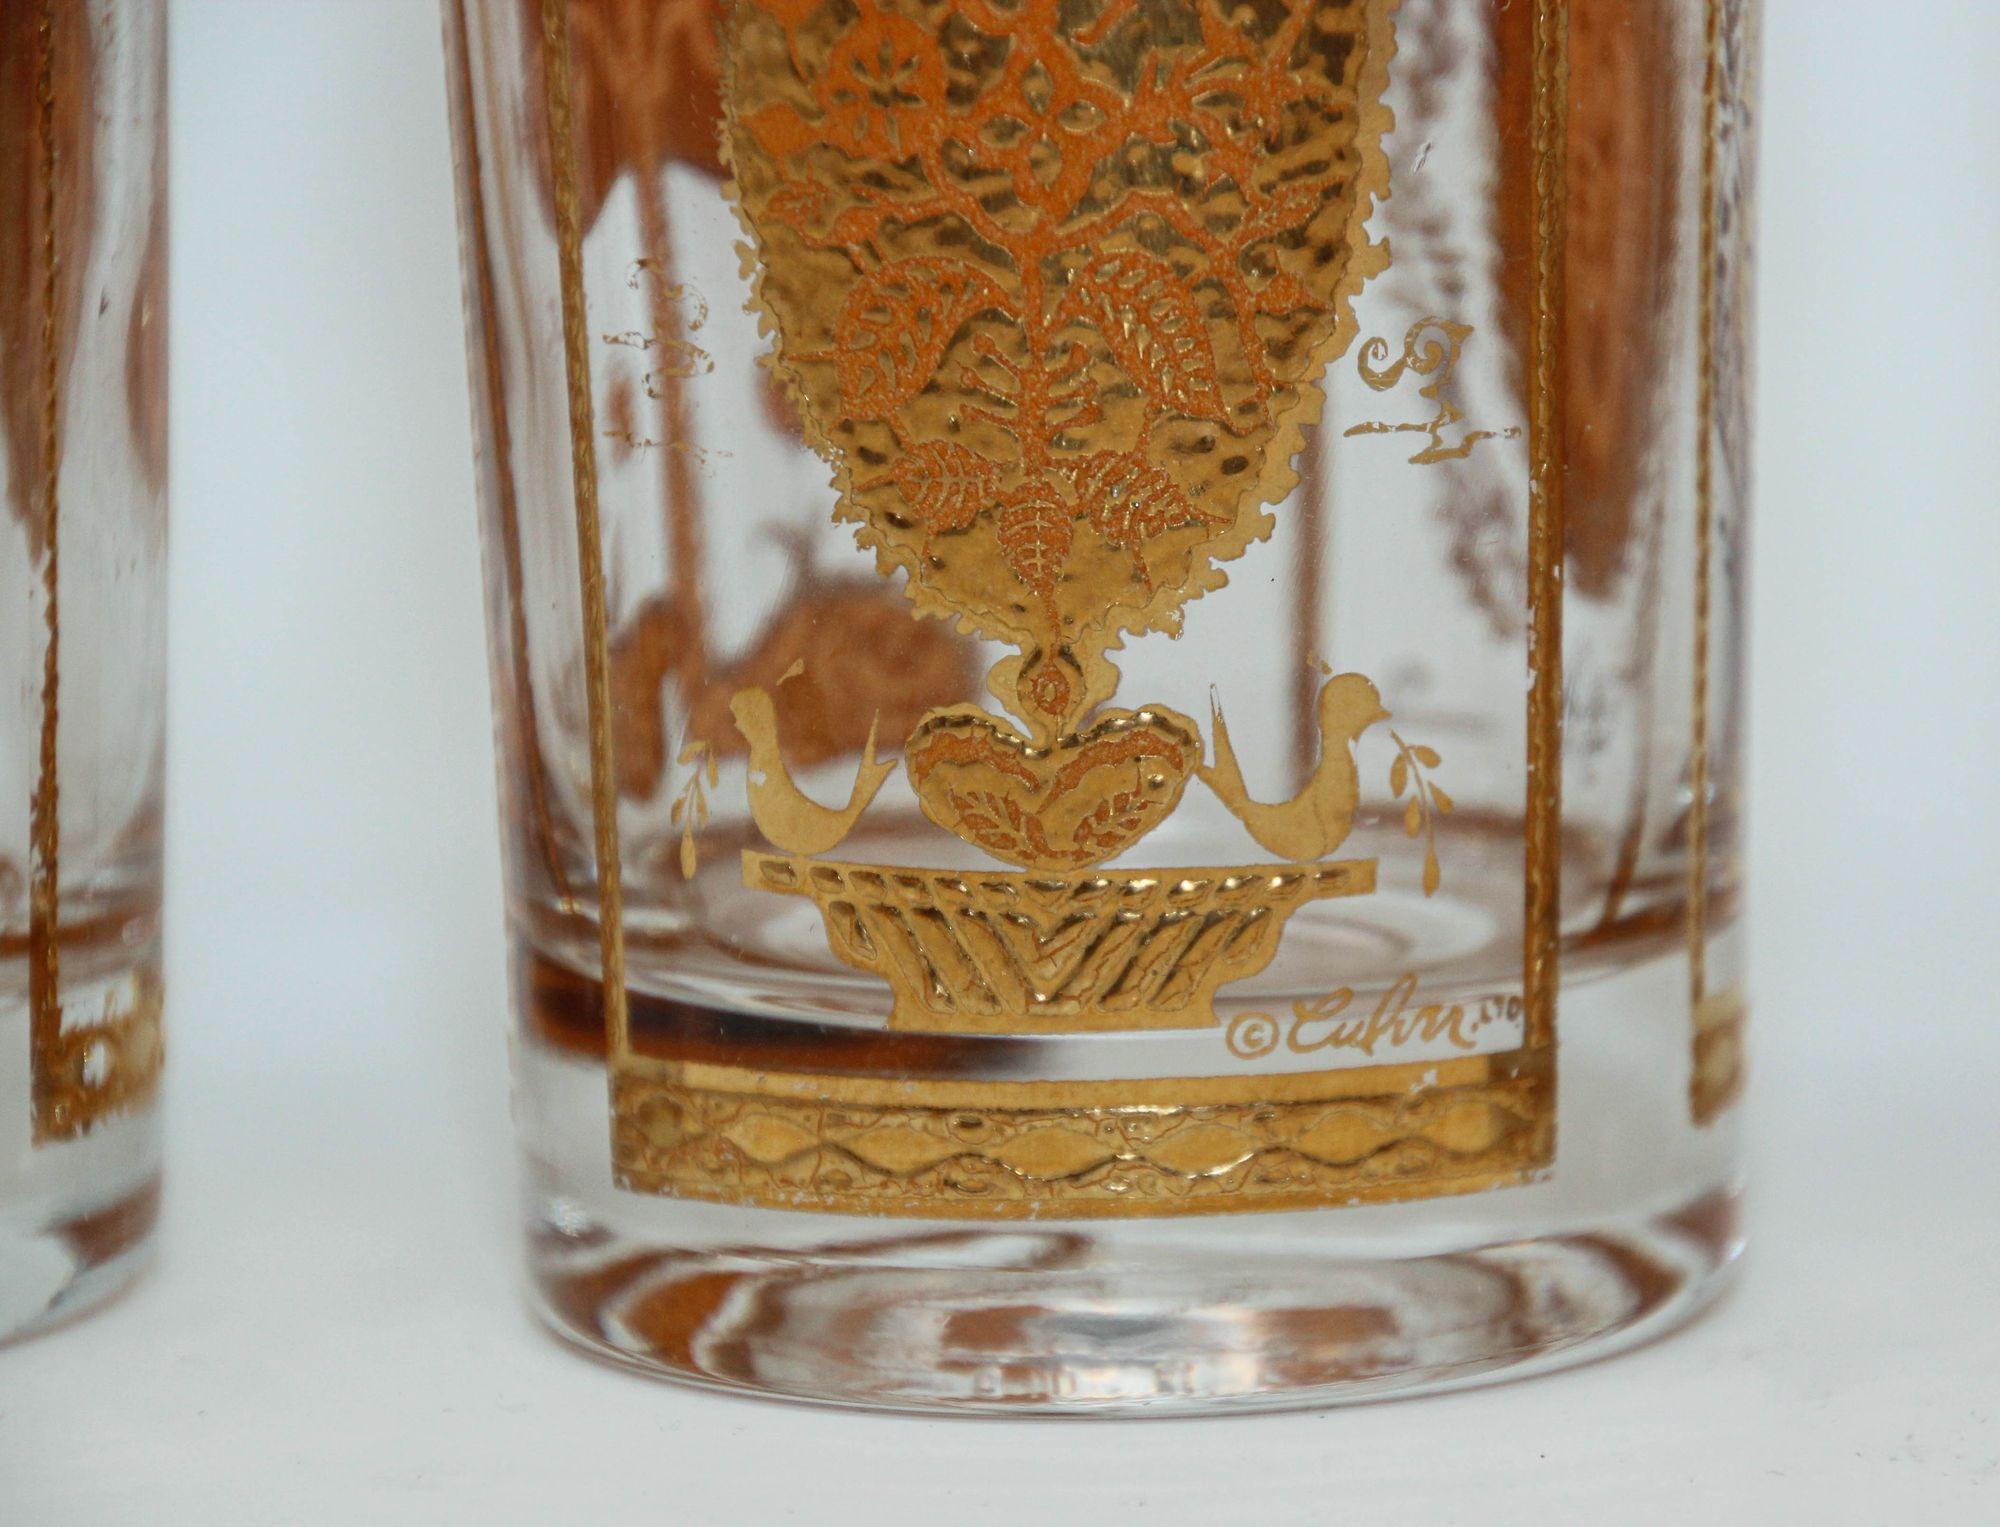 This beautiful set of four collins glasses designed by Culver ltd are embellished with gold Hindi pattern, extremely rare to find, the design on clear glasses with a 22 k gold textured overlay.
Hollywood Regency Gold Baroque Moorish Moroccan